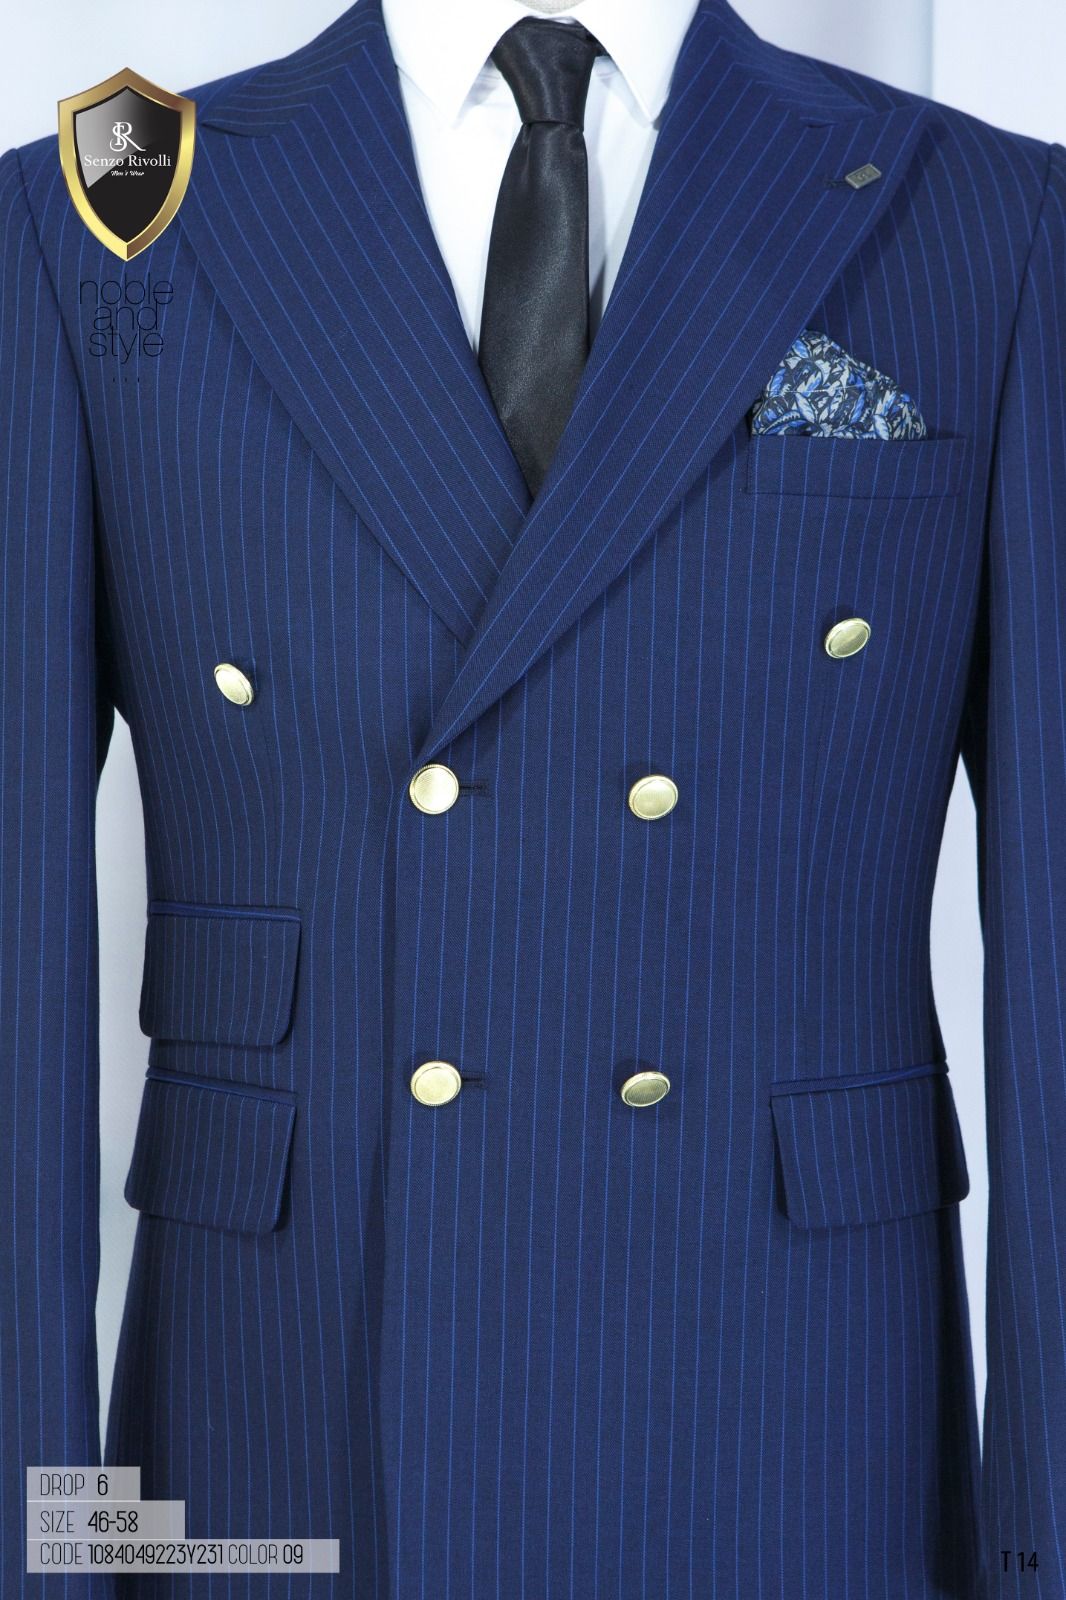 EXECUTIVE NAVY BLUE AND LIGHT BLUE STRIPPED BREASTED TURKEY SUIT WITH GOLDEN BUTTON-deluxe.com.ng